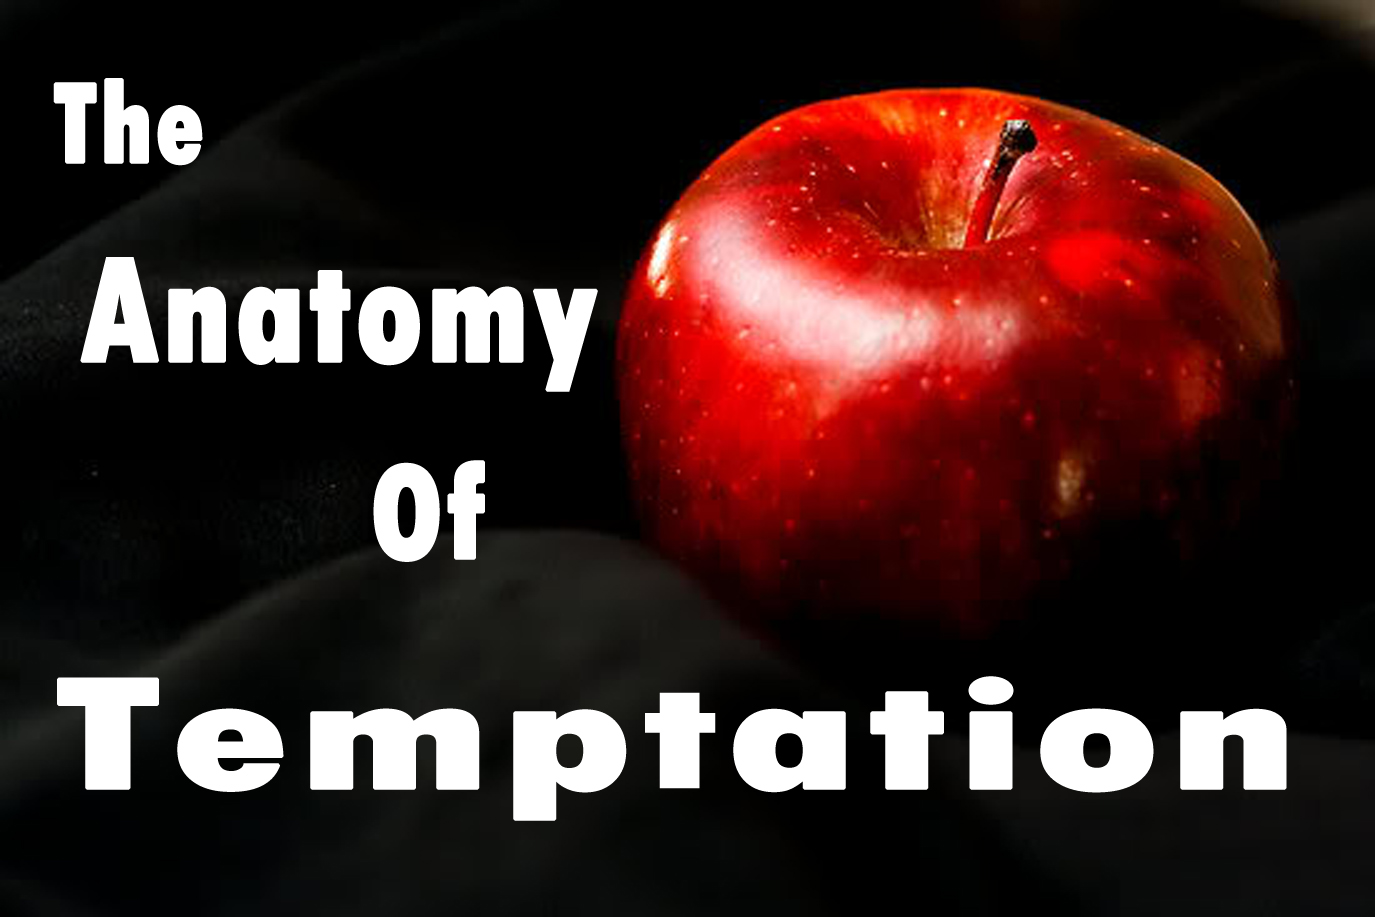 Anatomy of Temptation: How Desire Gets Corrupted